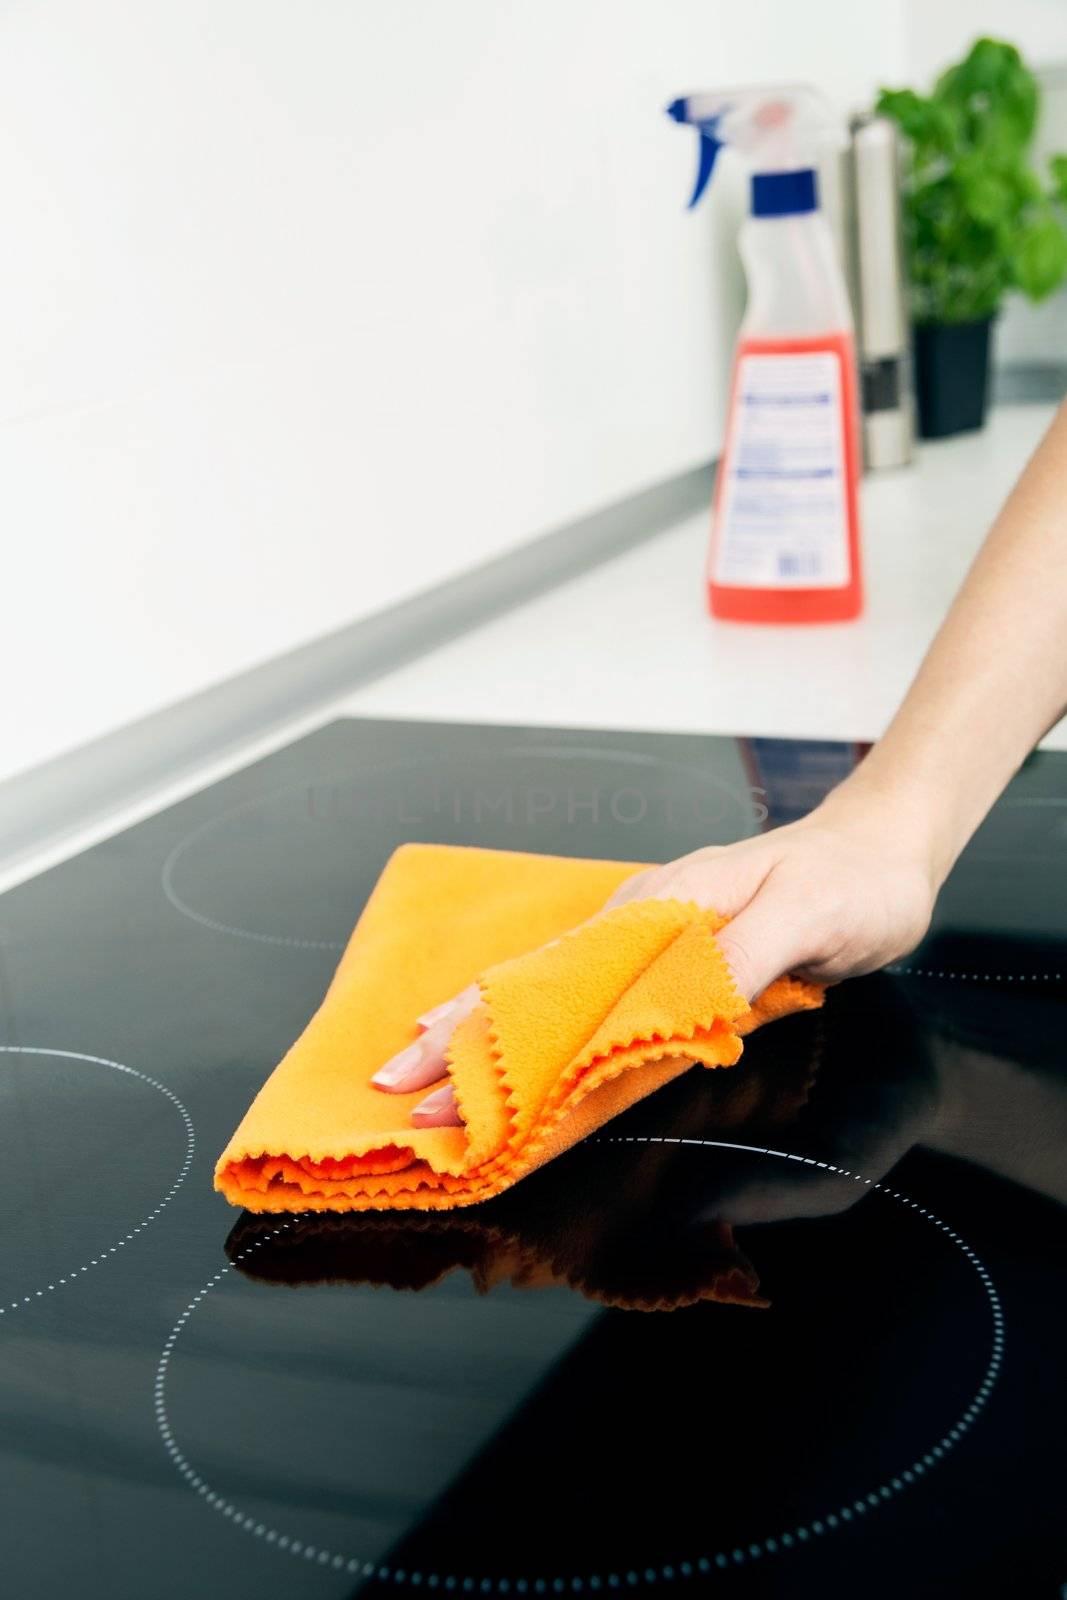 Hand cleaning induction stove